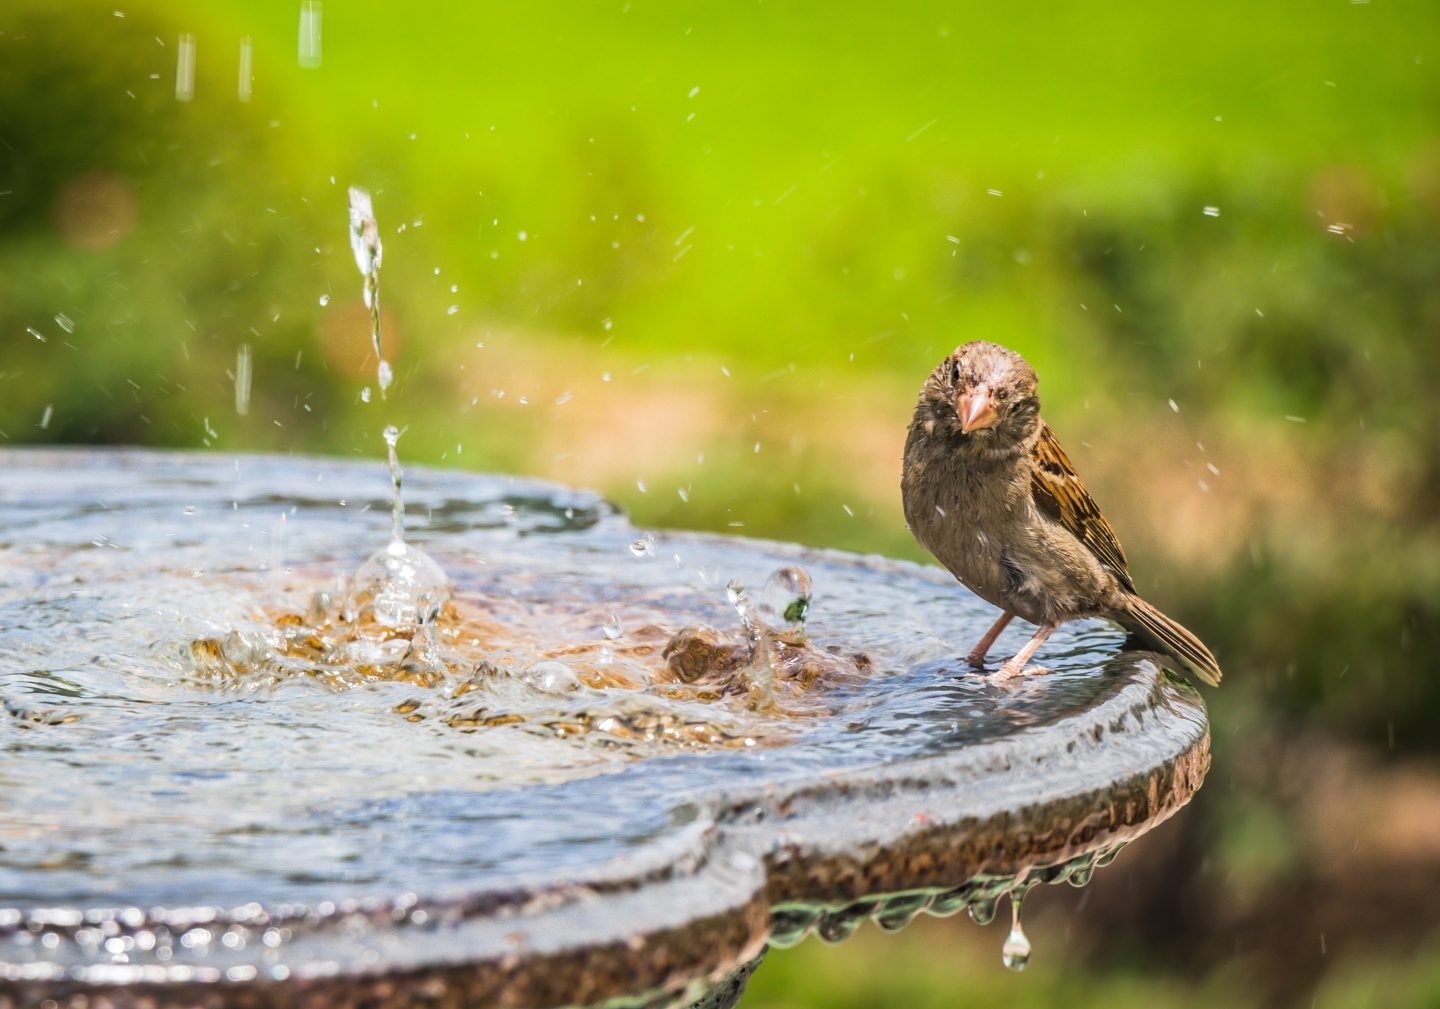 Sparrow sitting on the edge of a birdbath in a garden which has a water fountain just out of shot